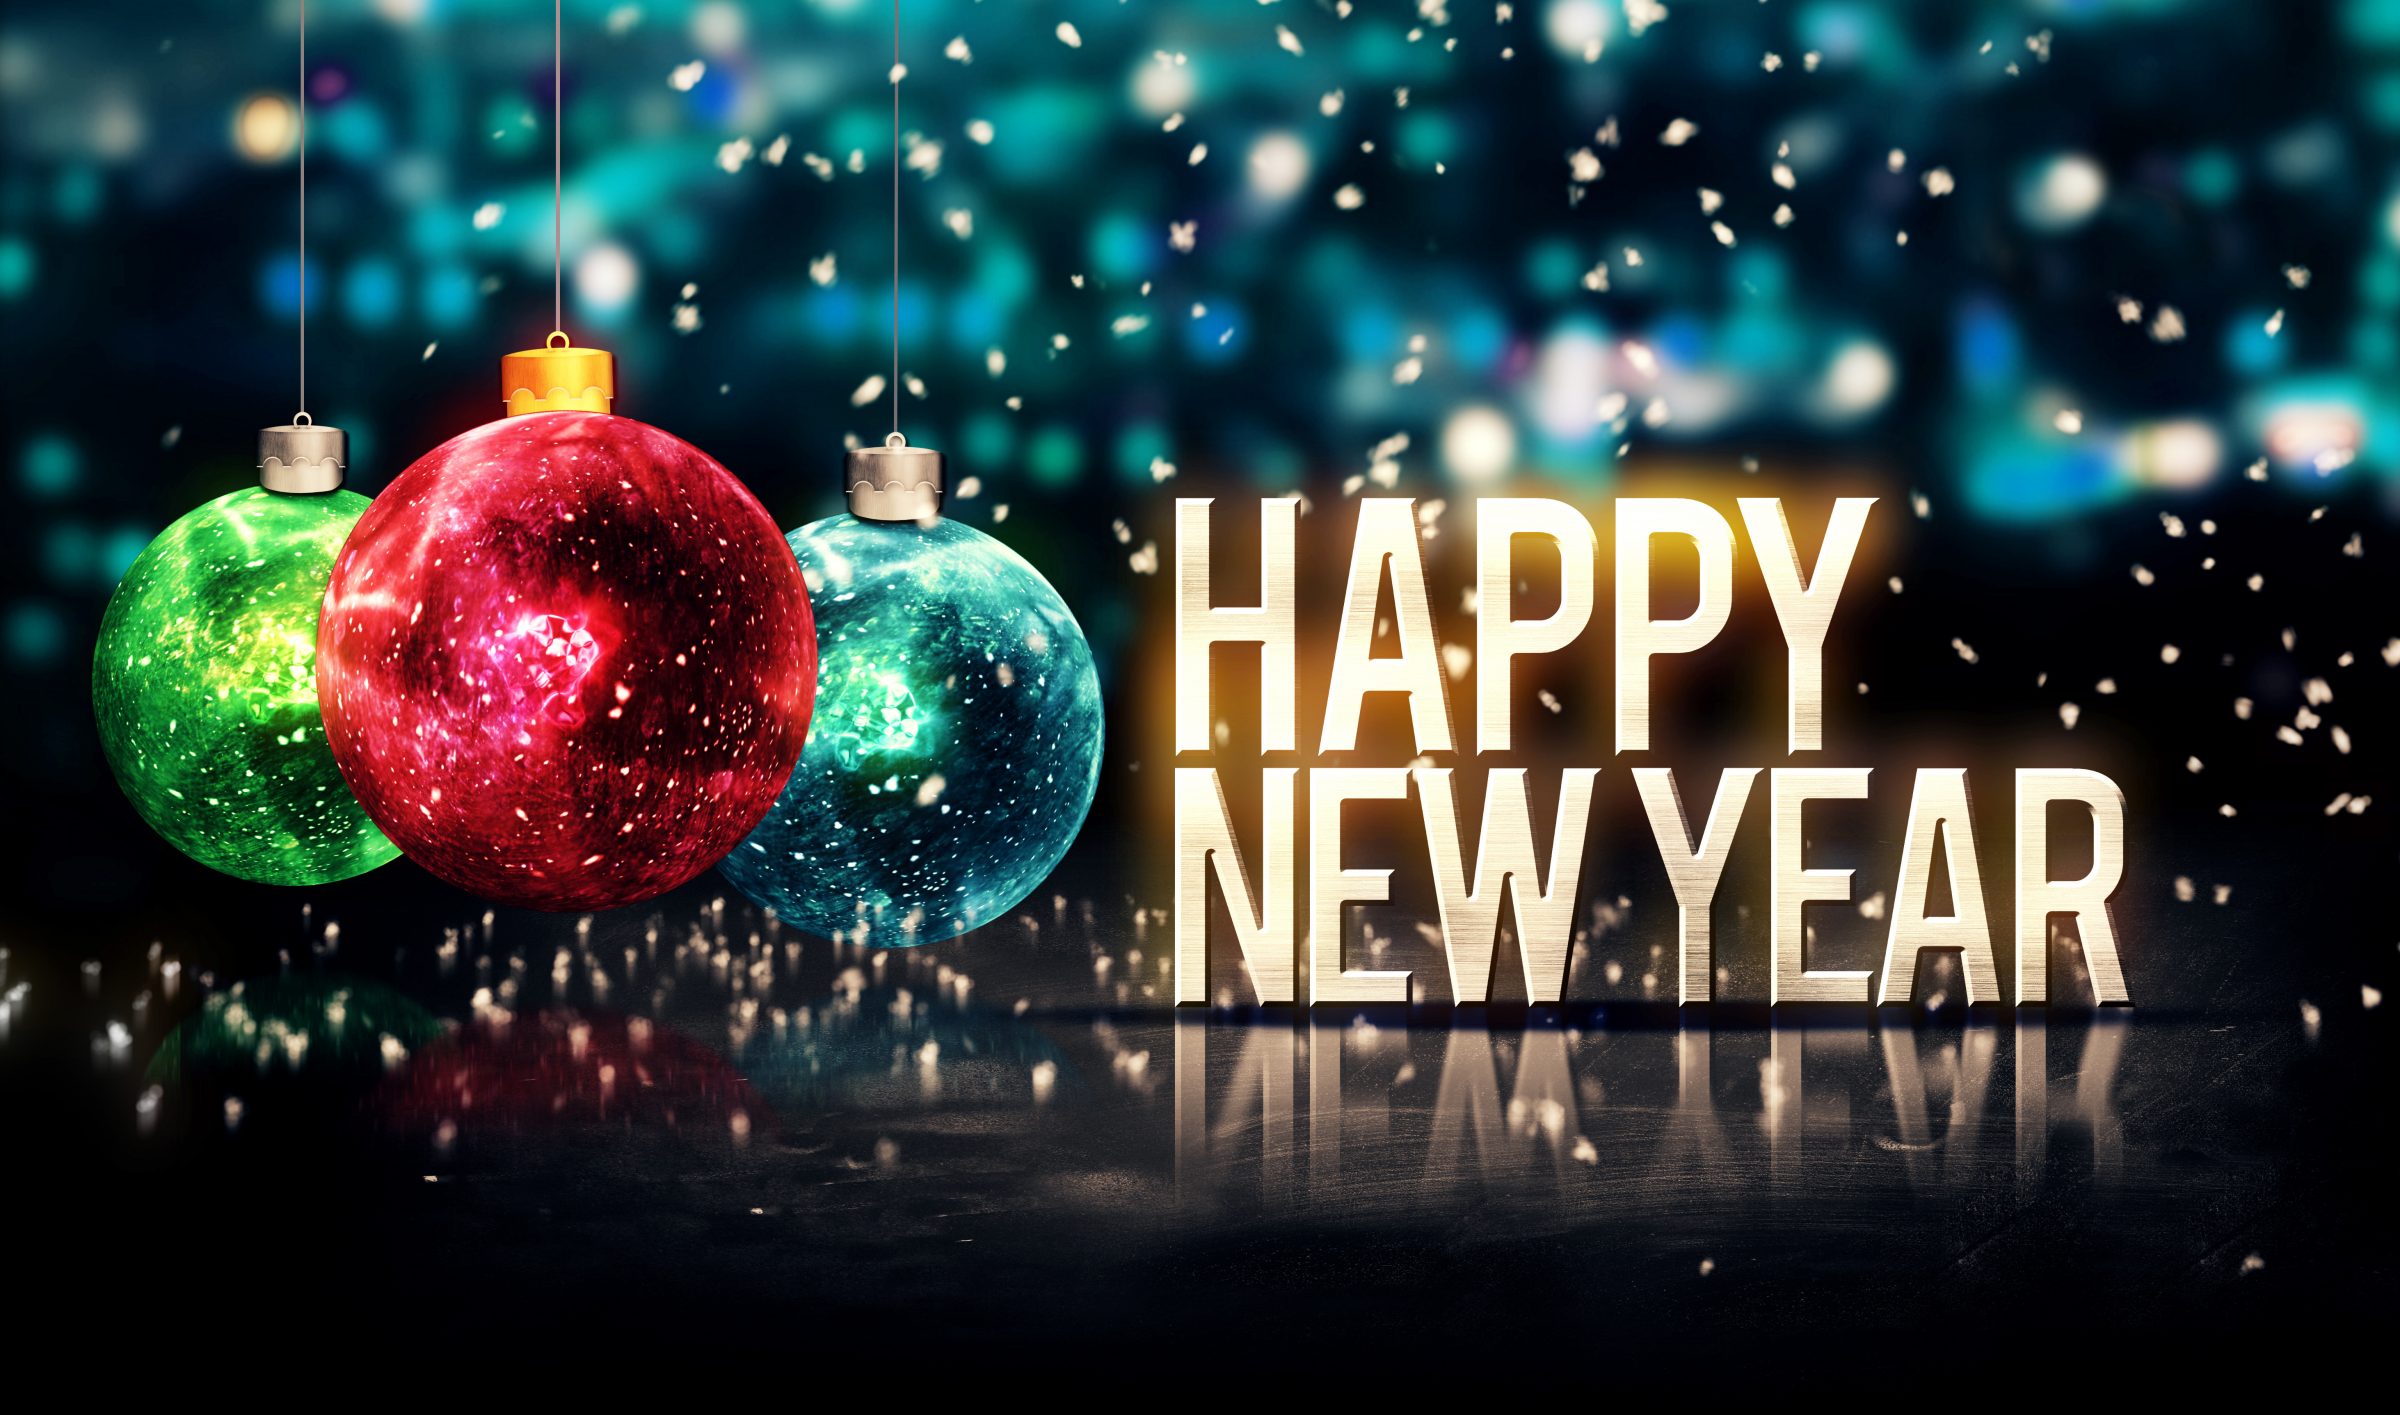 Wishing you a Happy New Year! featured image